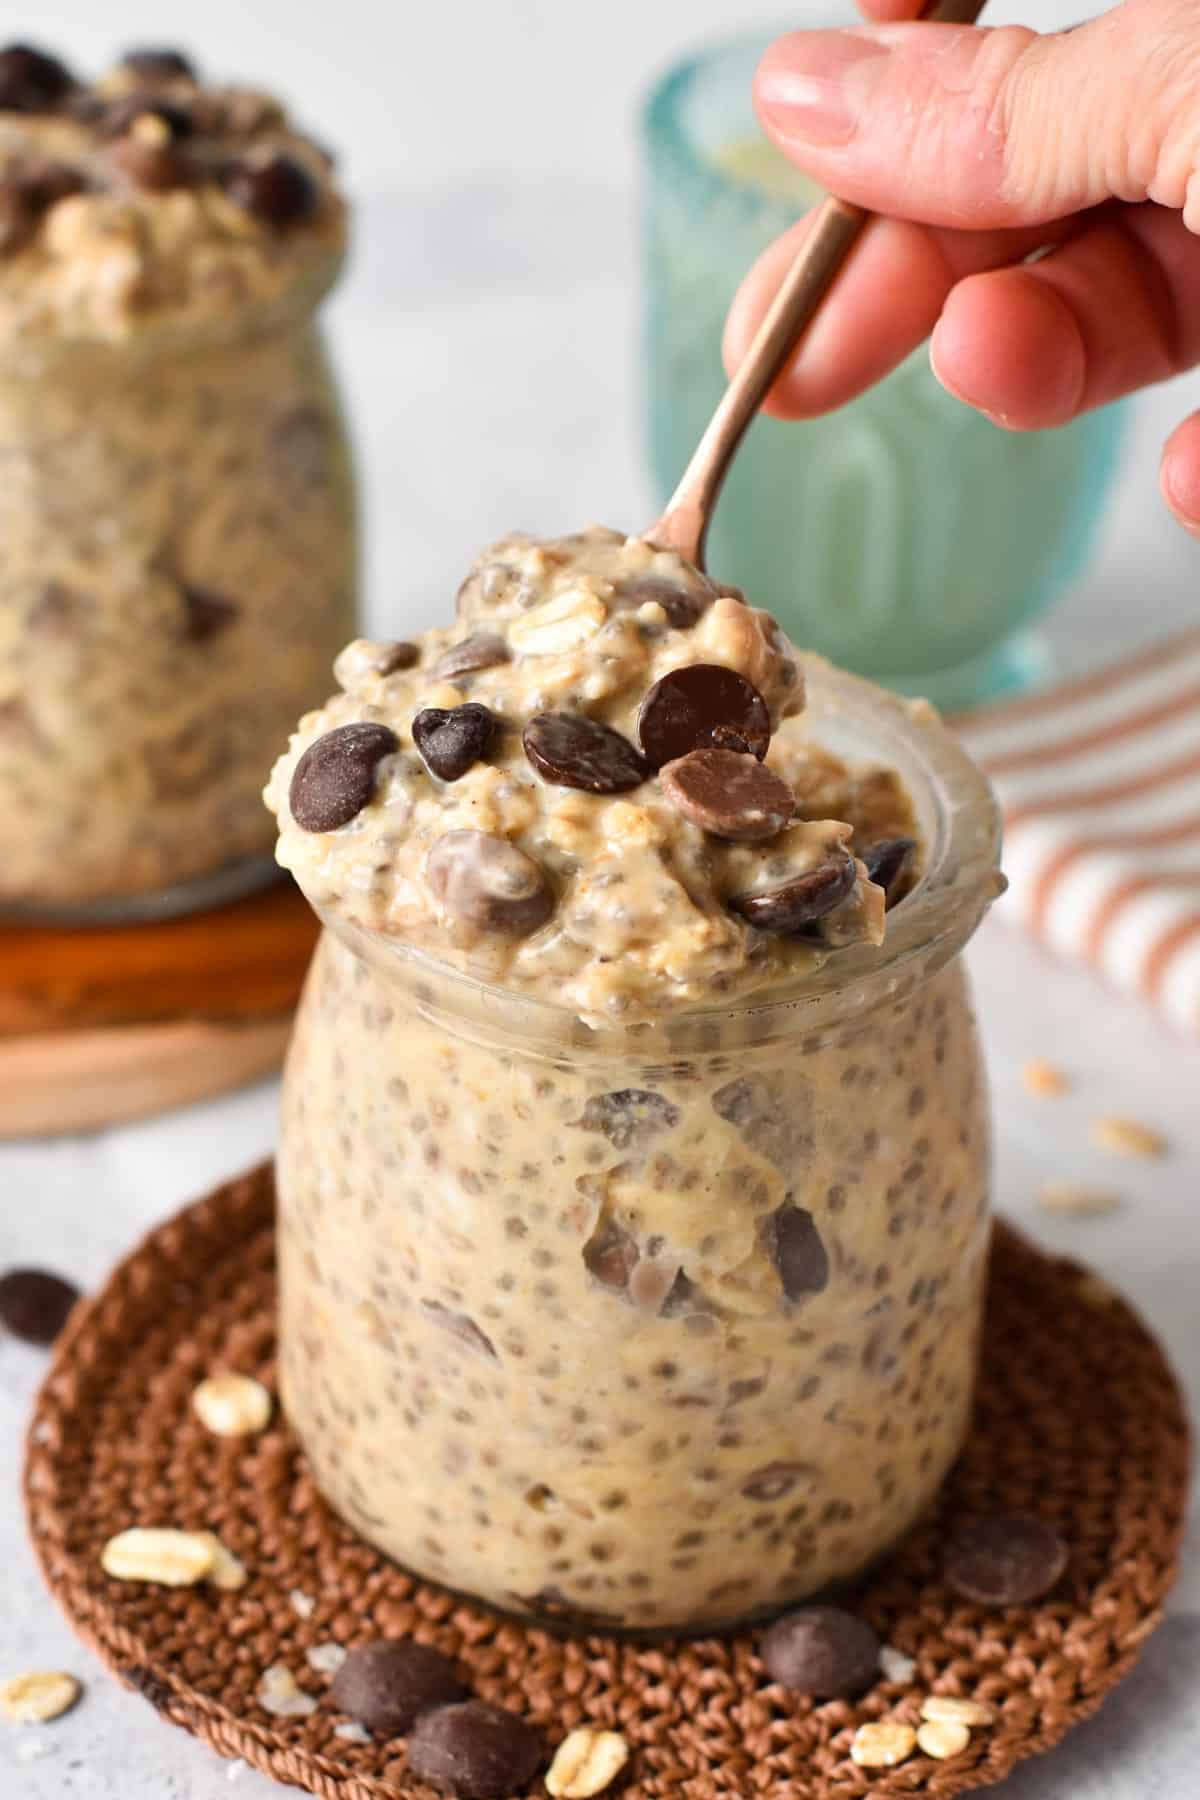 This Cookie Dough Overnight Oats is the perfect healthy breakfast for cookies lovers. It tastes like raw cookie dough, but 100 % much healthier packed with wholegrains oats, vitamins and proteins.